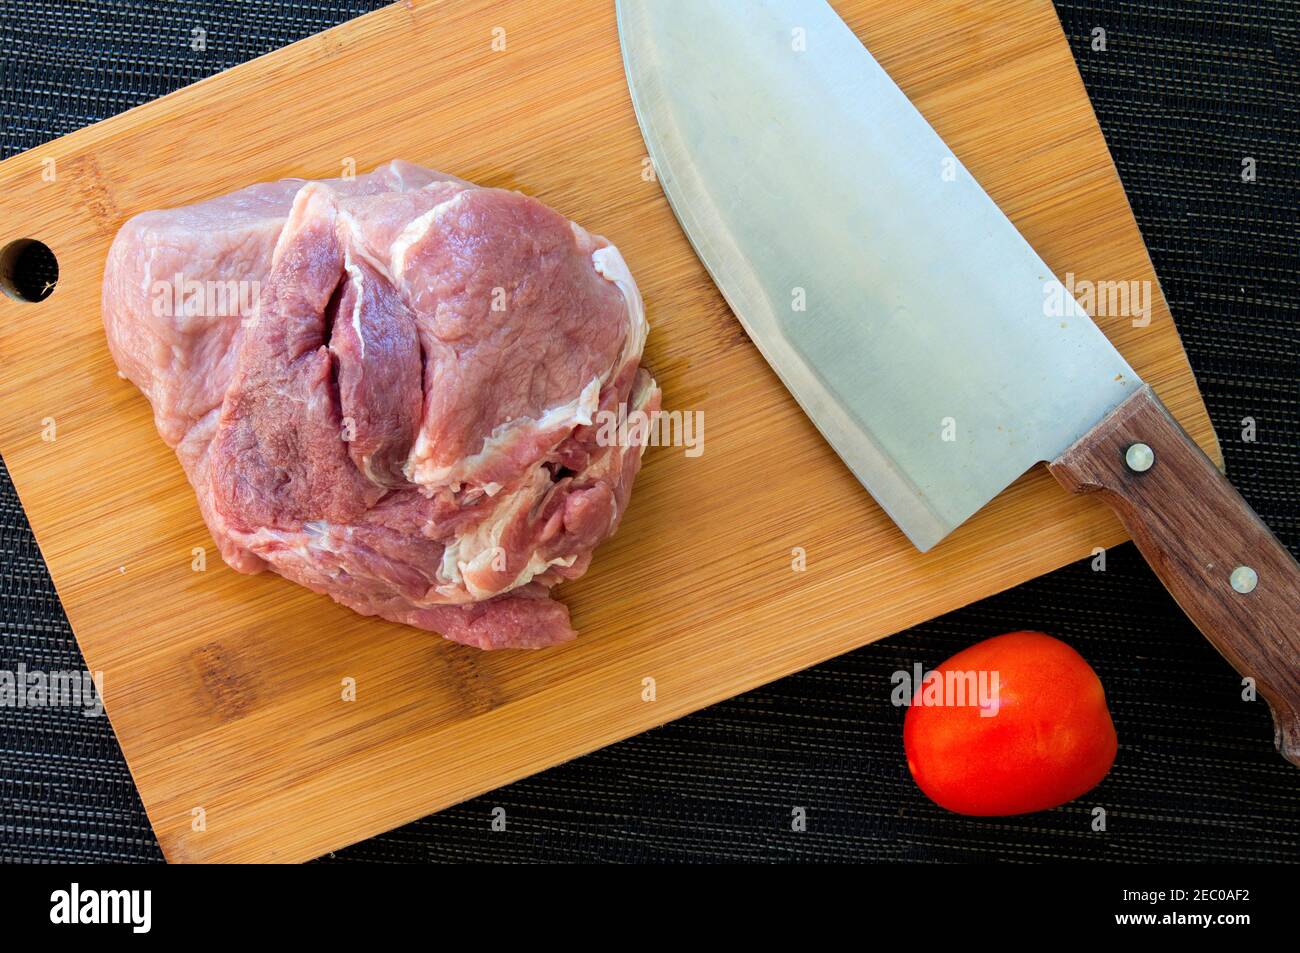 Meat and tomato on wooden board. Cutting meat by chef knife. Beef or pork for cooking. Kitchen table top view with meat and vegetables. Stainless stee Stock Photo